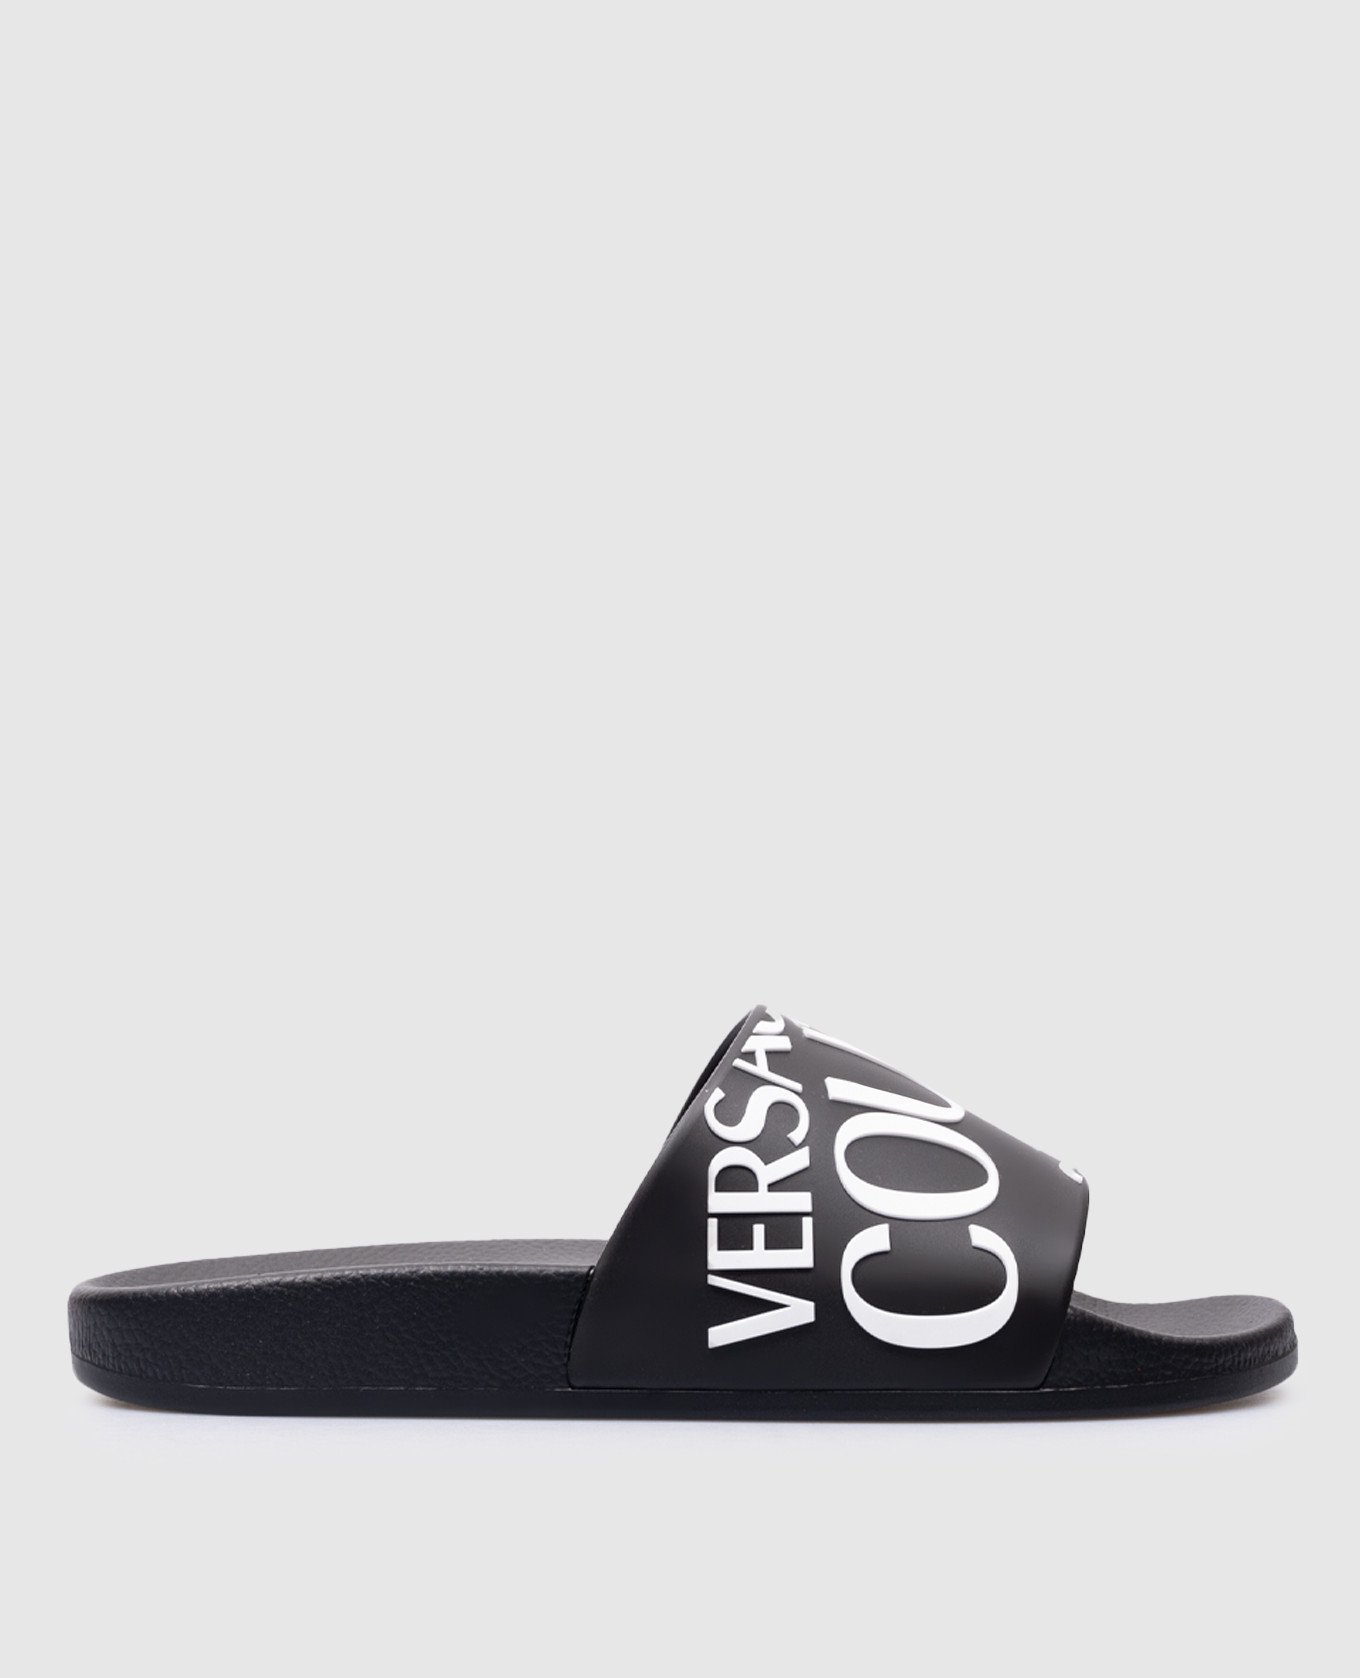 Black sliders with contrasting textured logo